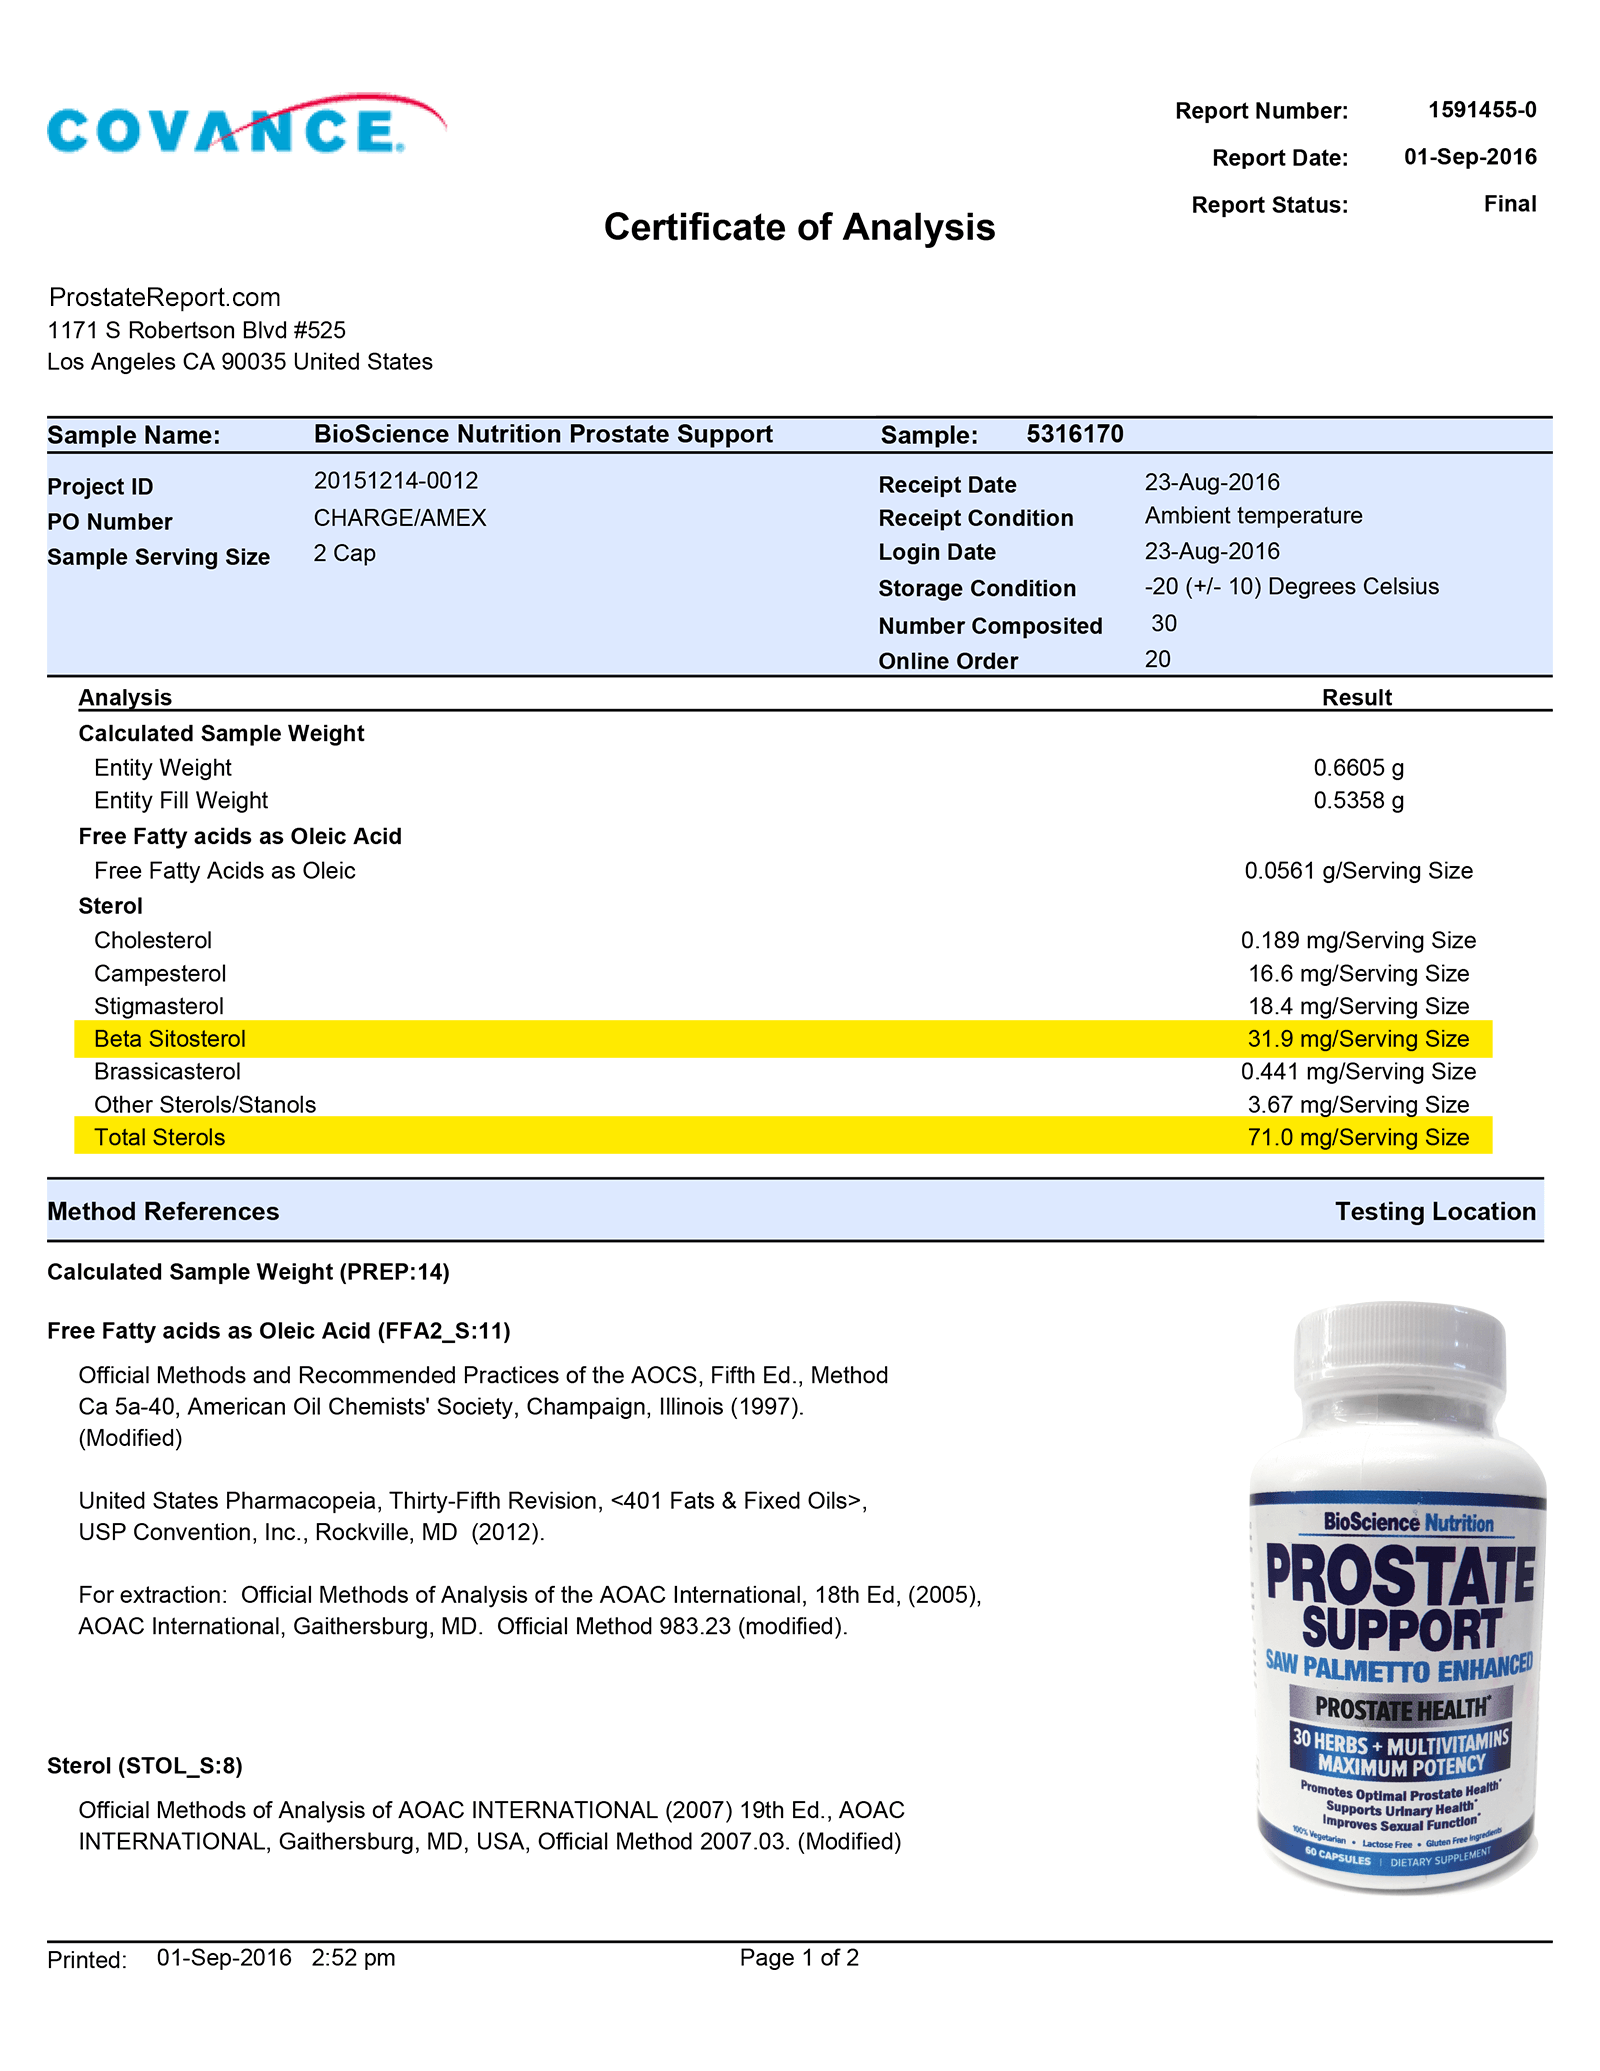 Prostate Support lab report